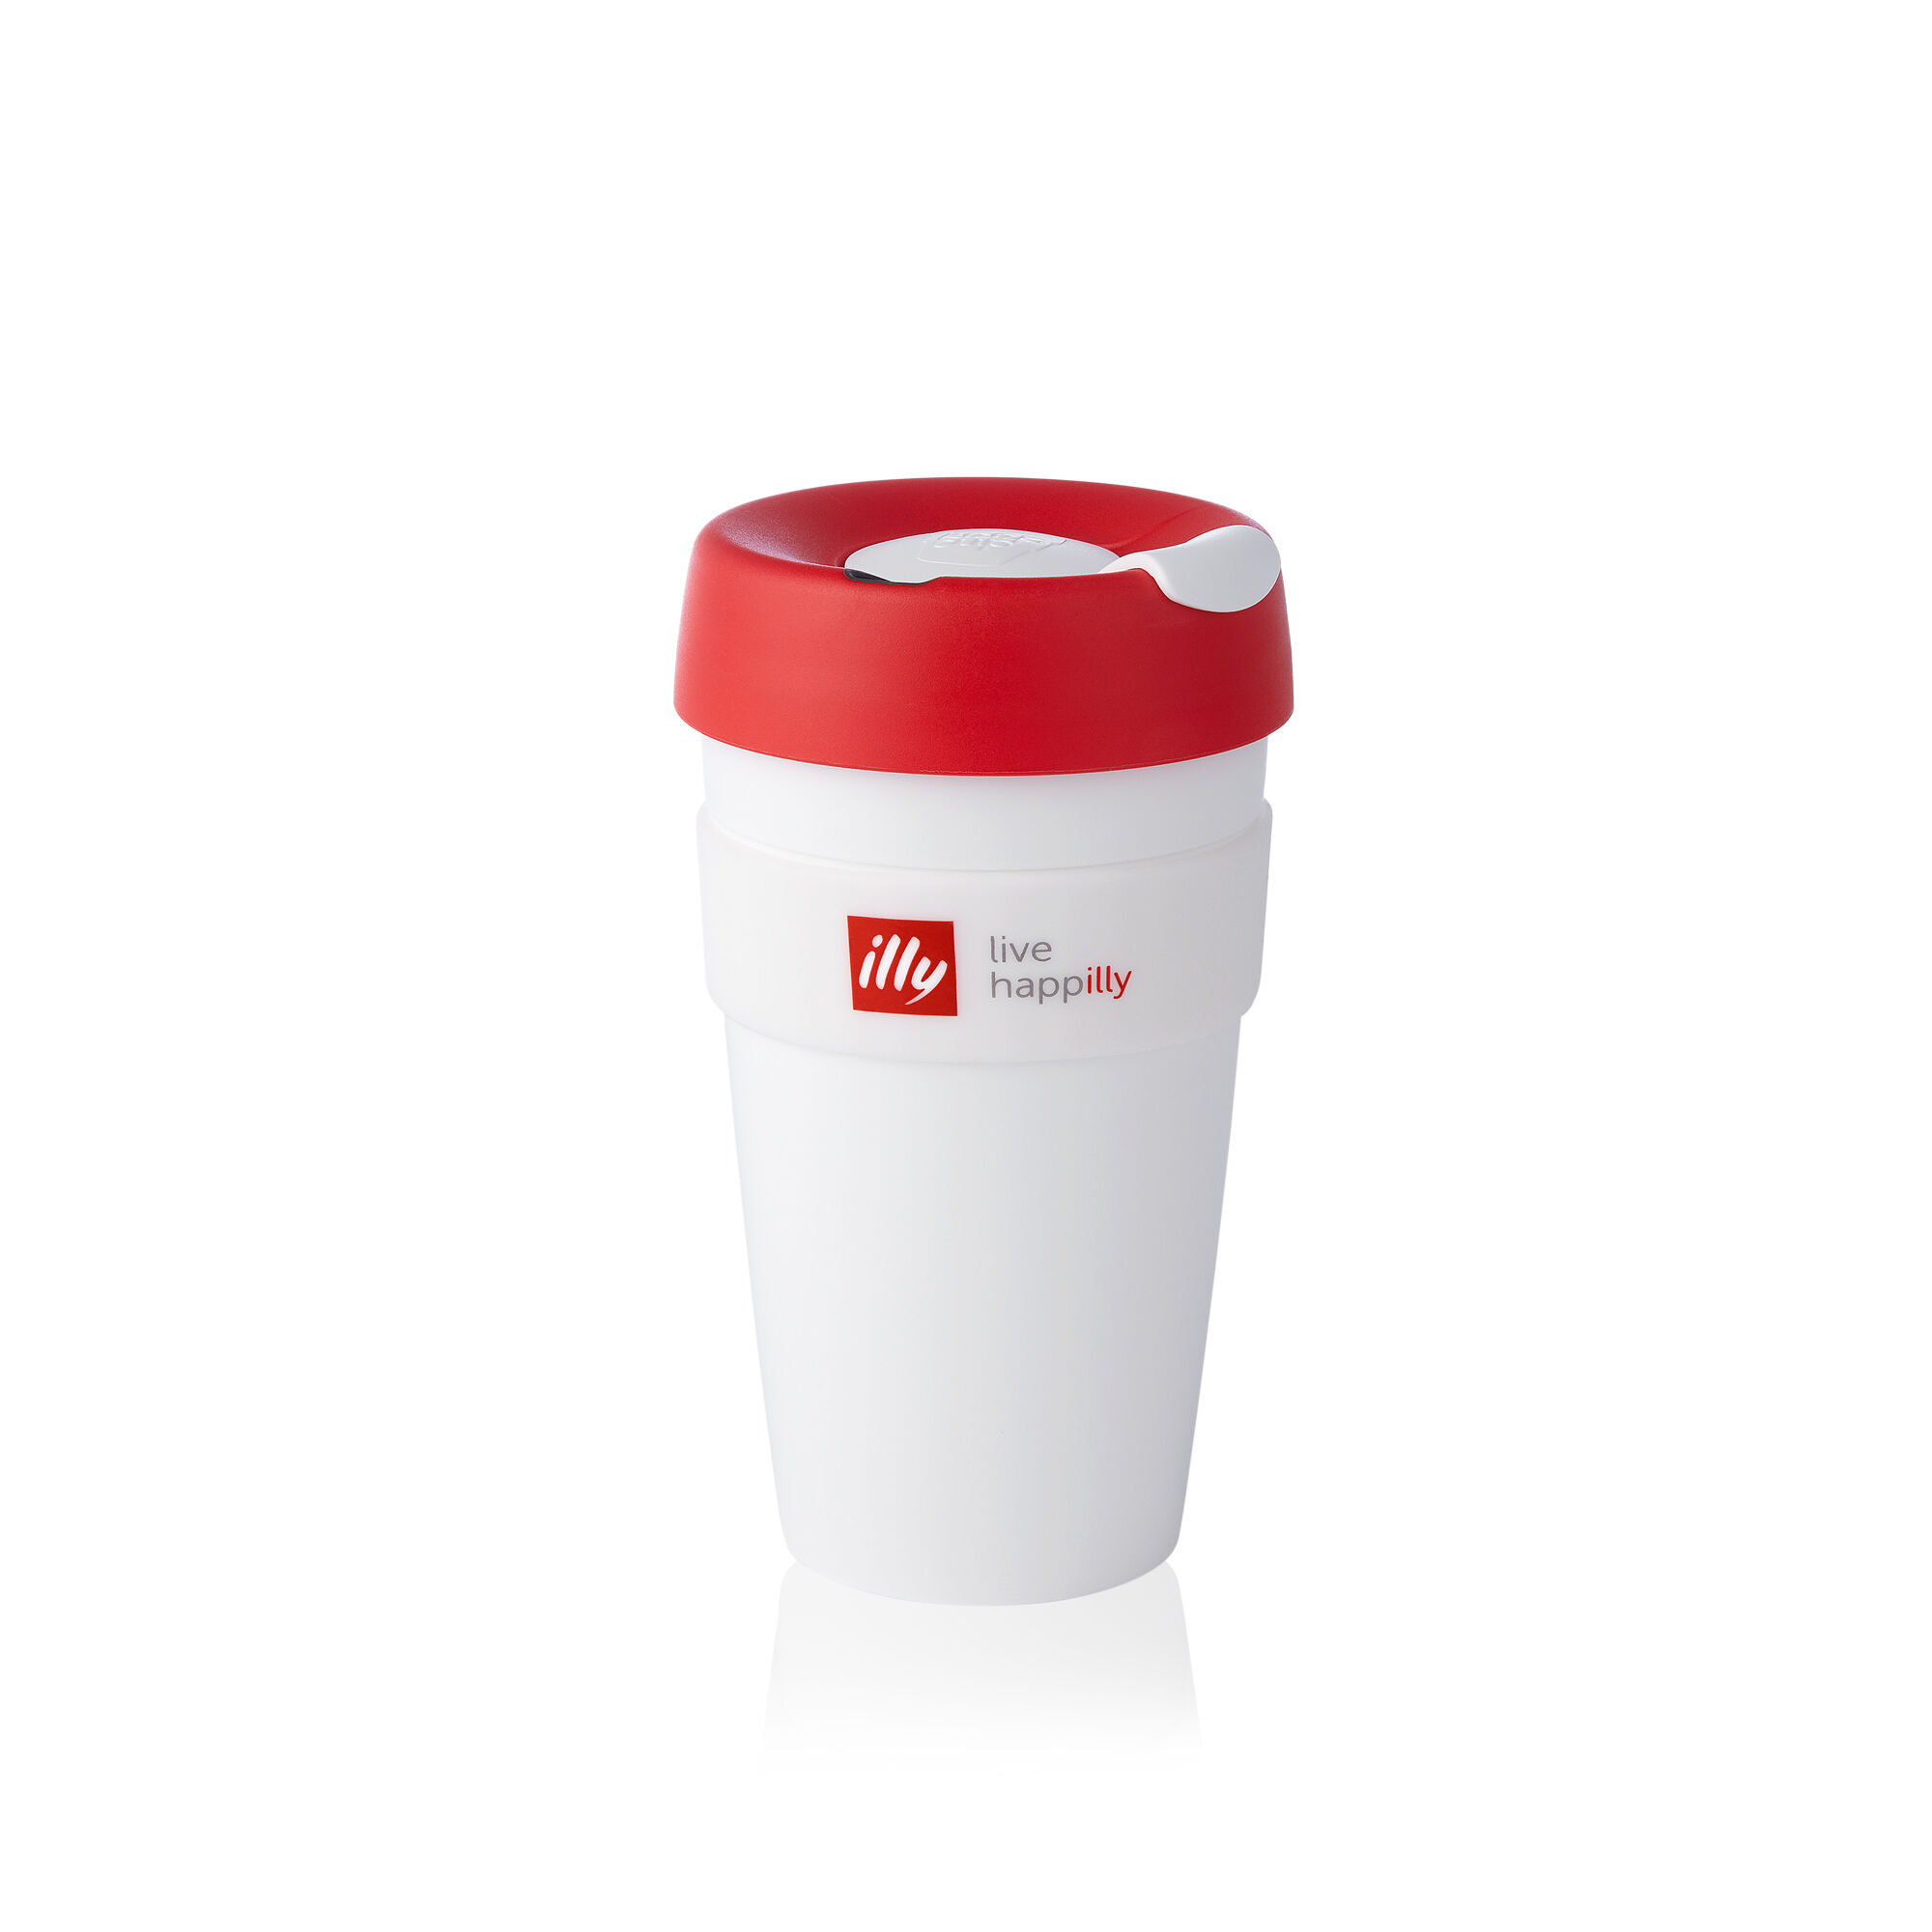 live happilly White with Red lid KeepCup front view